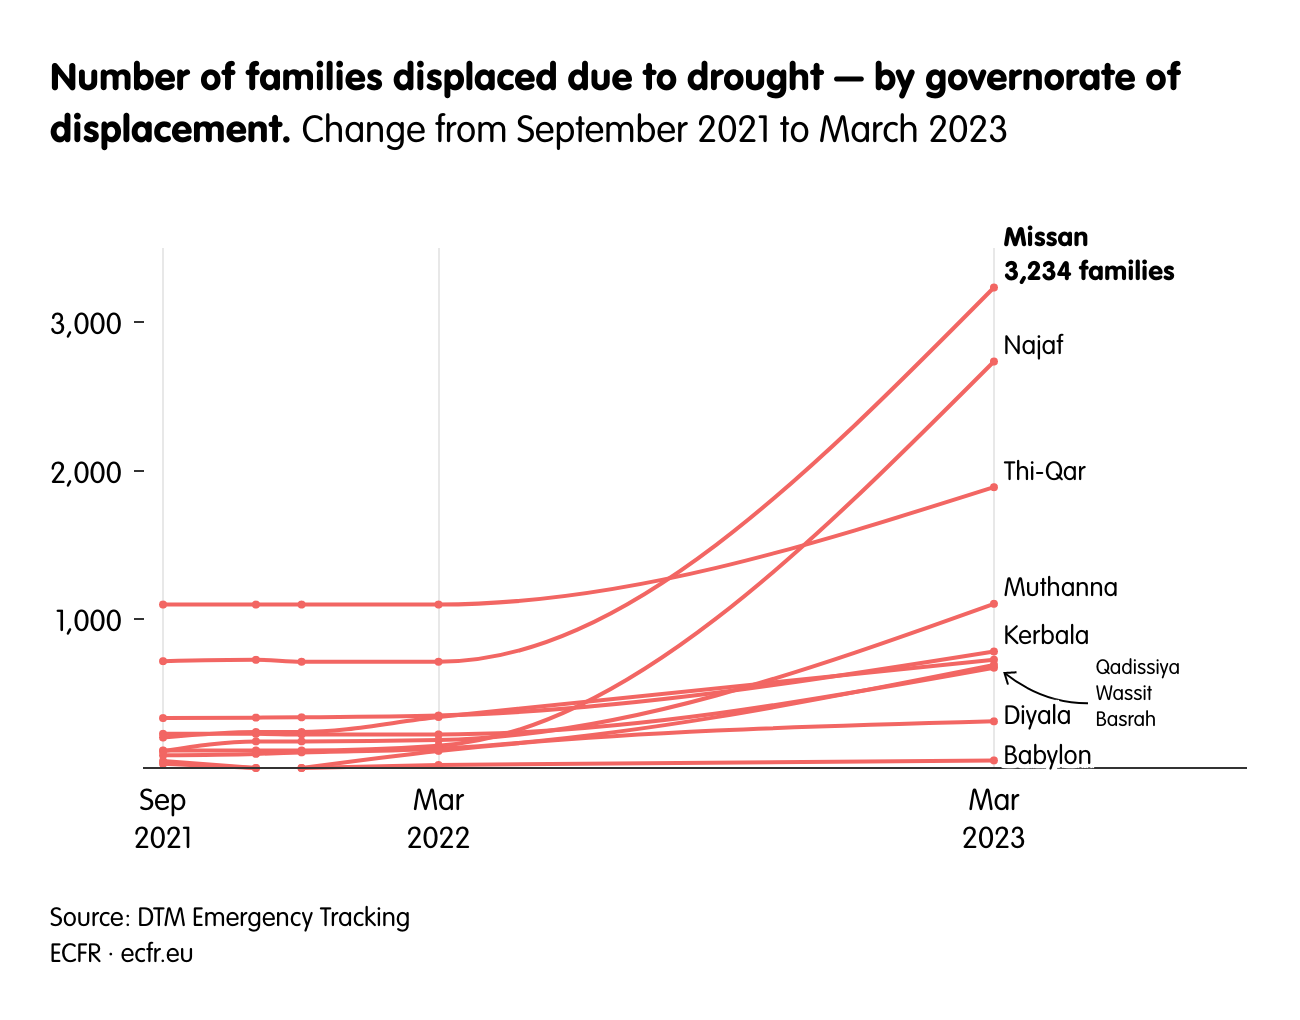 Number of families displaced due to drought — by governorate of displacement.